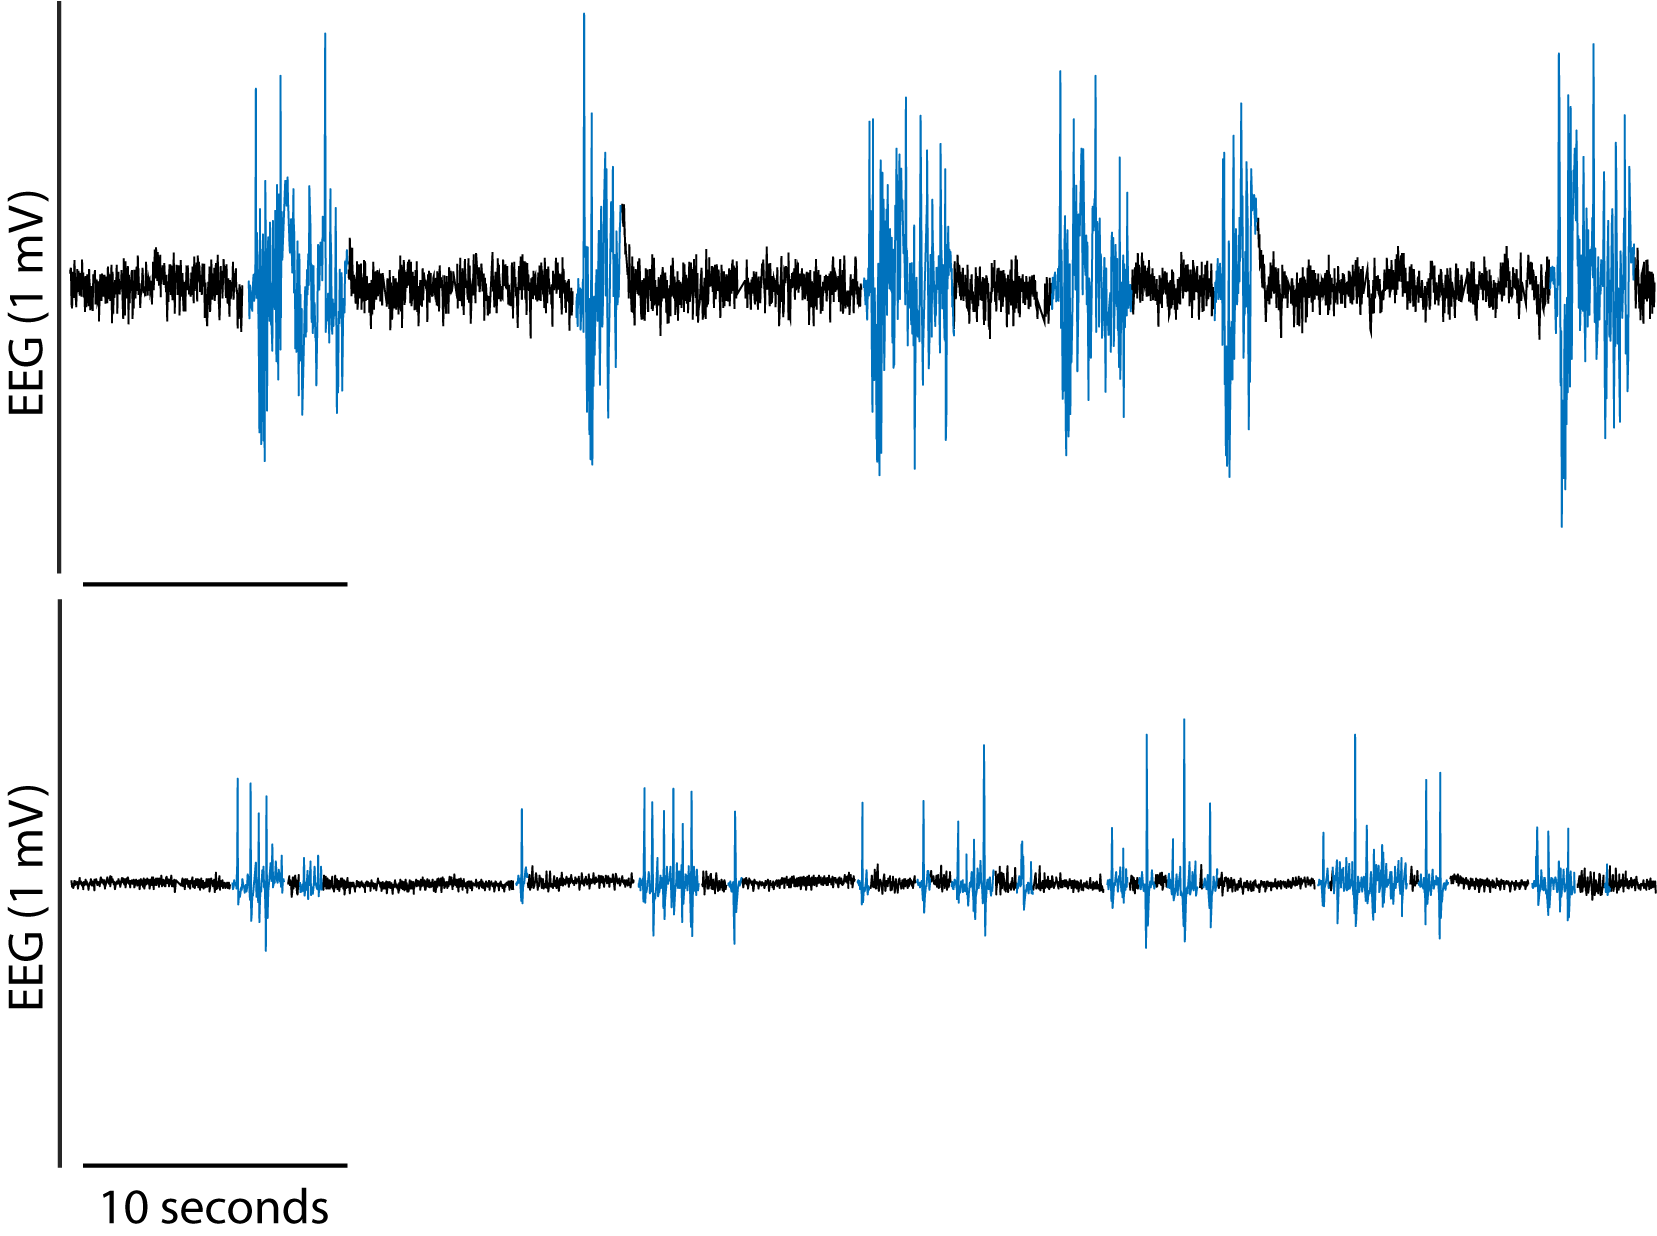 EEG burst-suppression pattern induced by either sevoflurane or propofol general anesthesia.